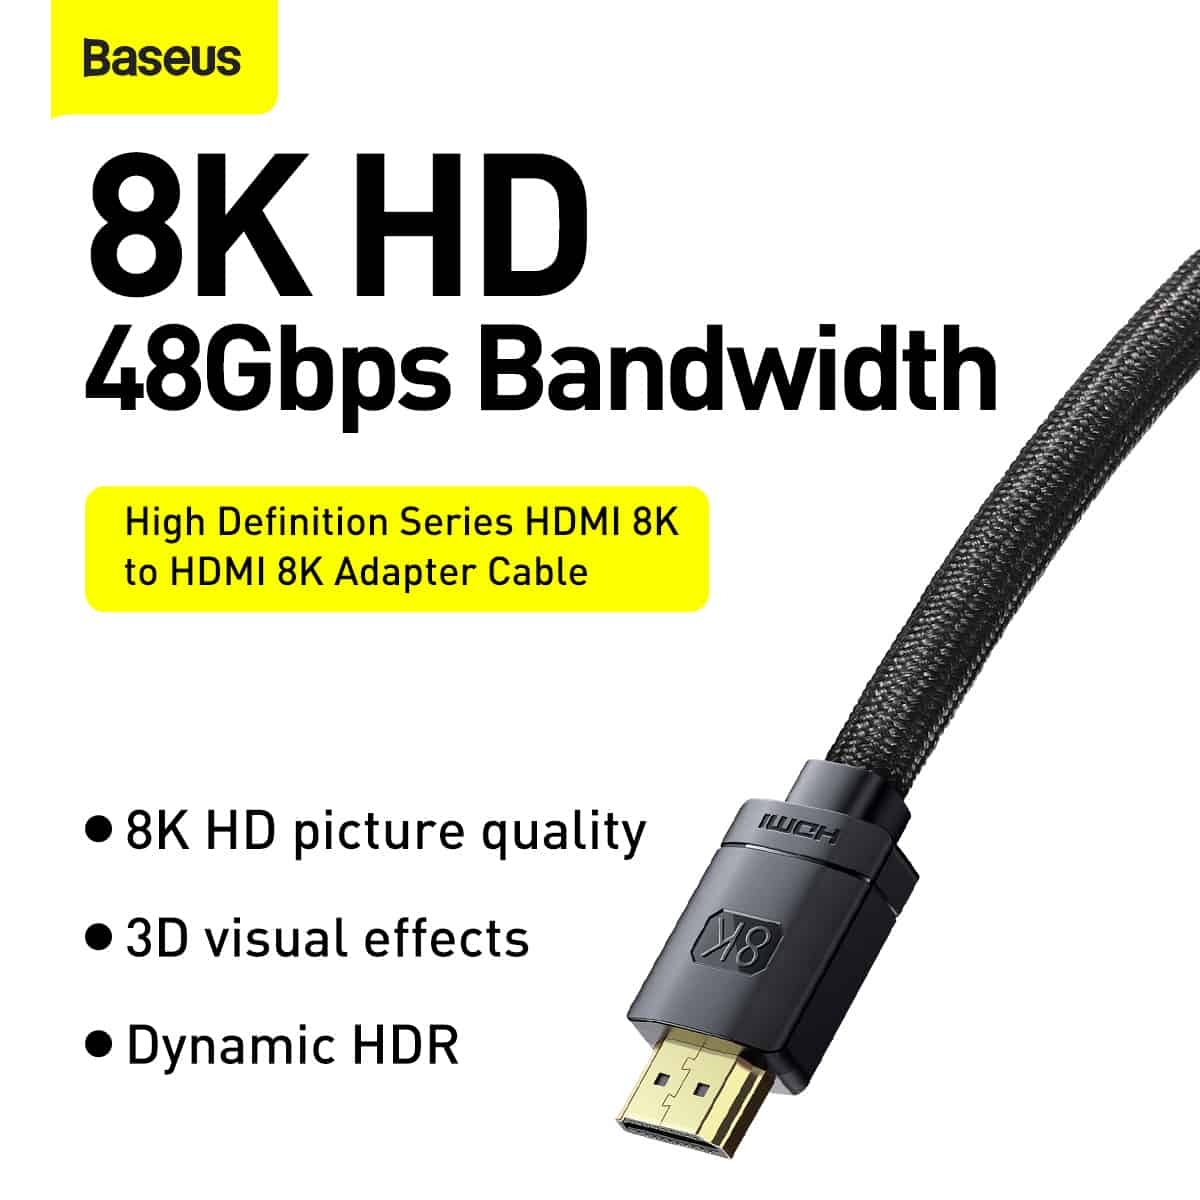 Baseus High Definition Series HDMI 8K to HDMI 8K Adapter Cable 3